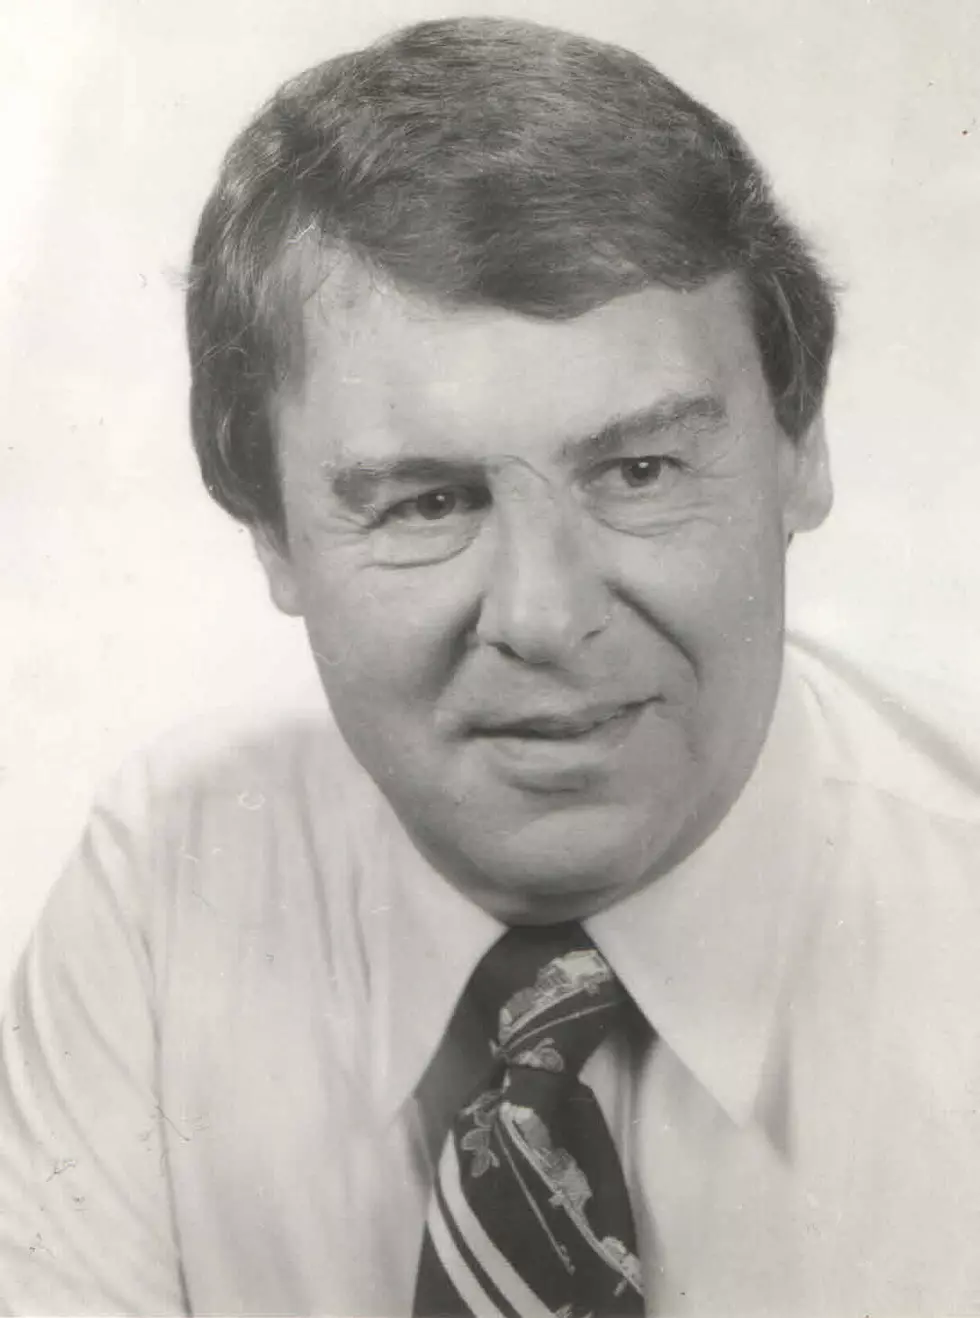 Lawrence O. Decker, a former St. Remy Resident, Dies at 87